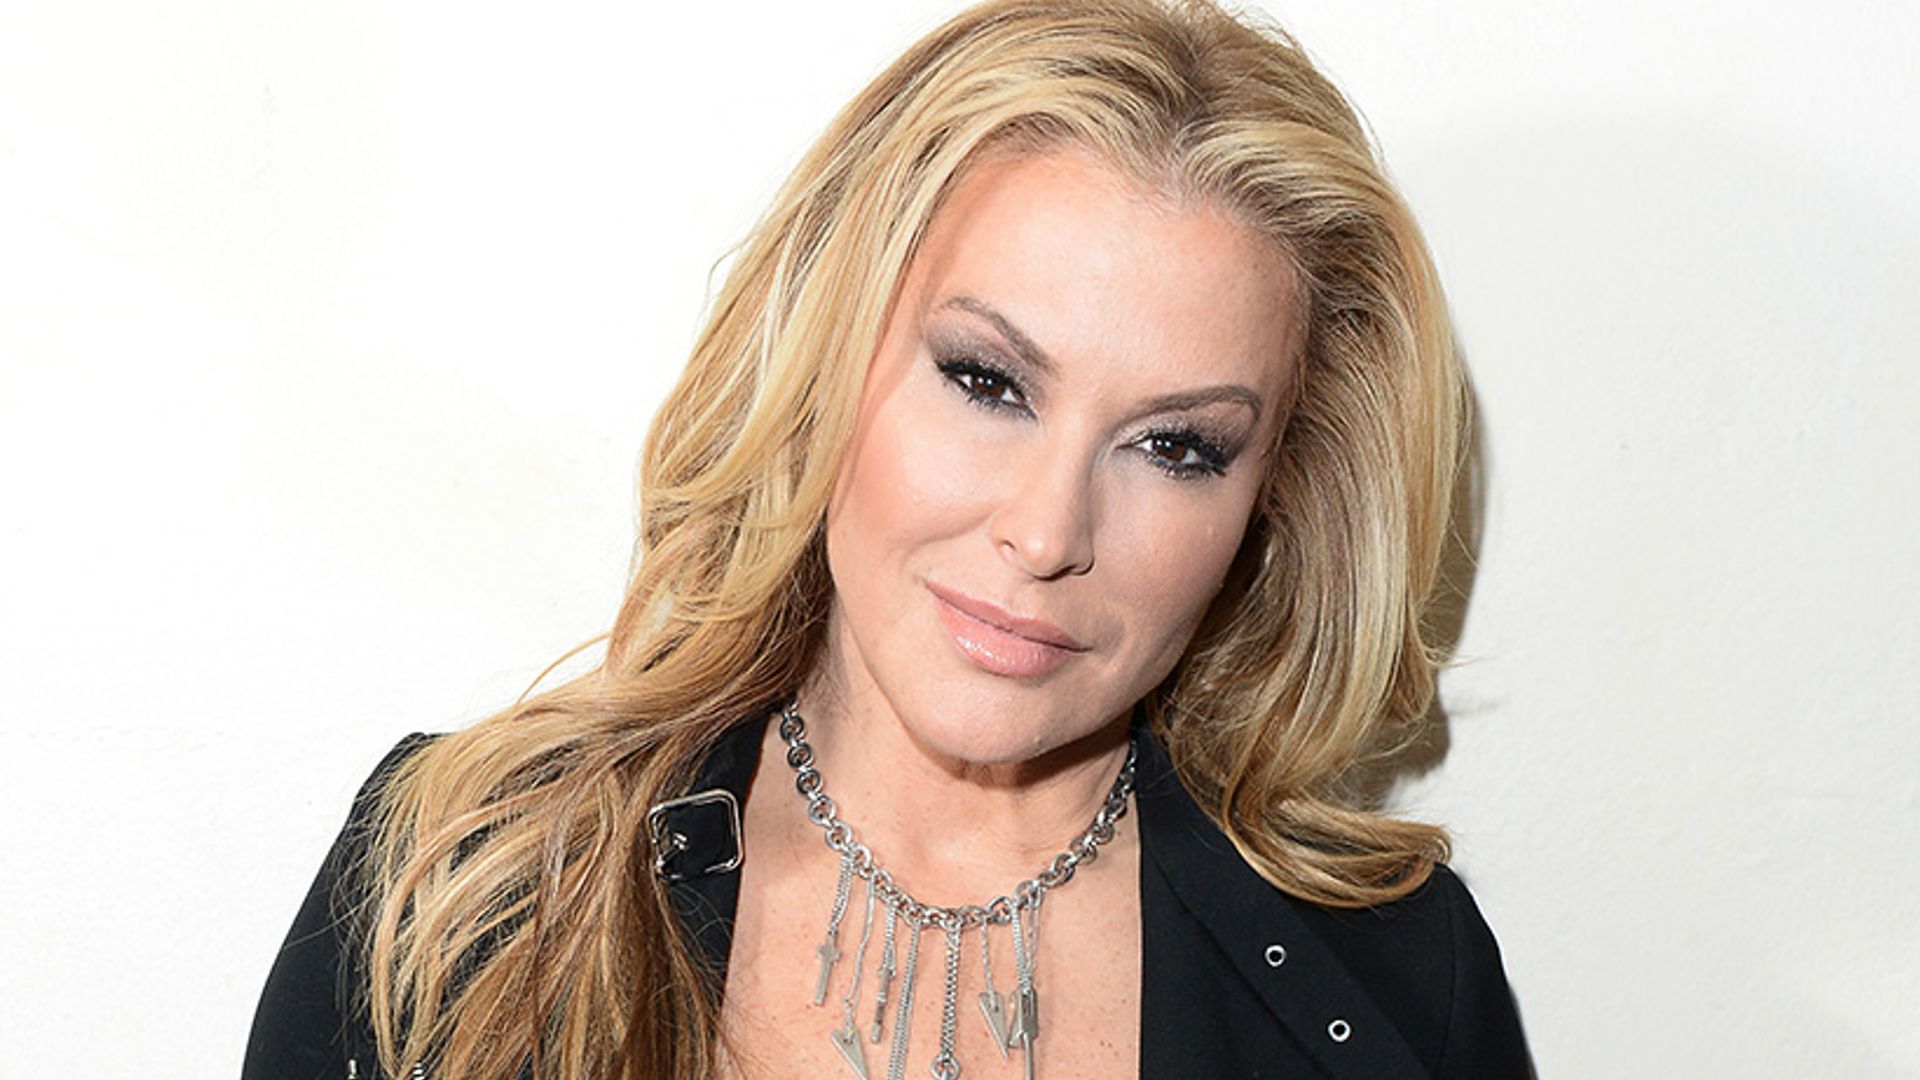 Strictly Come Dancing 2016: Anastacia confirmed as the latest star to sign up!